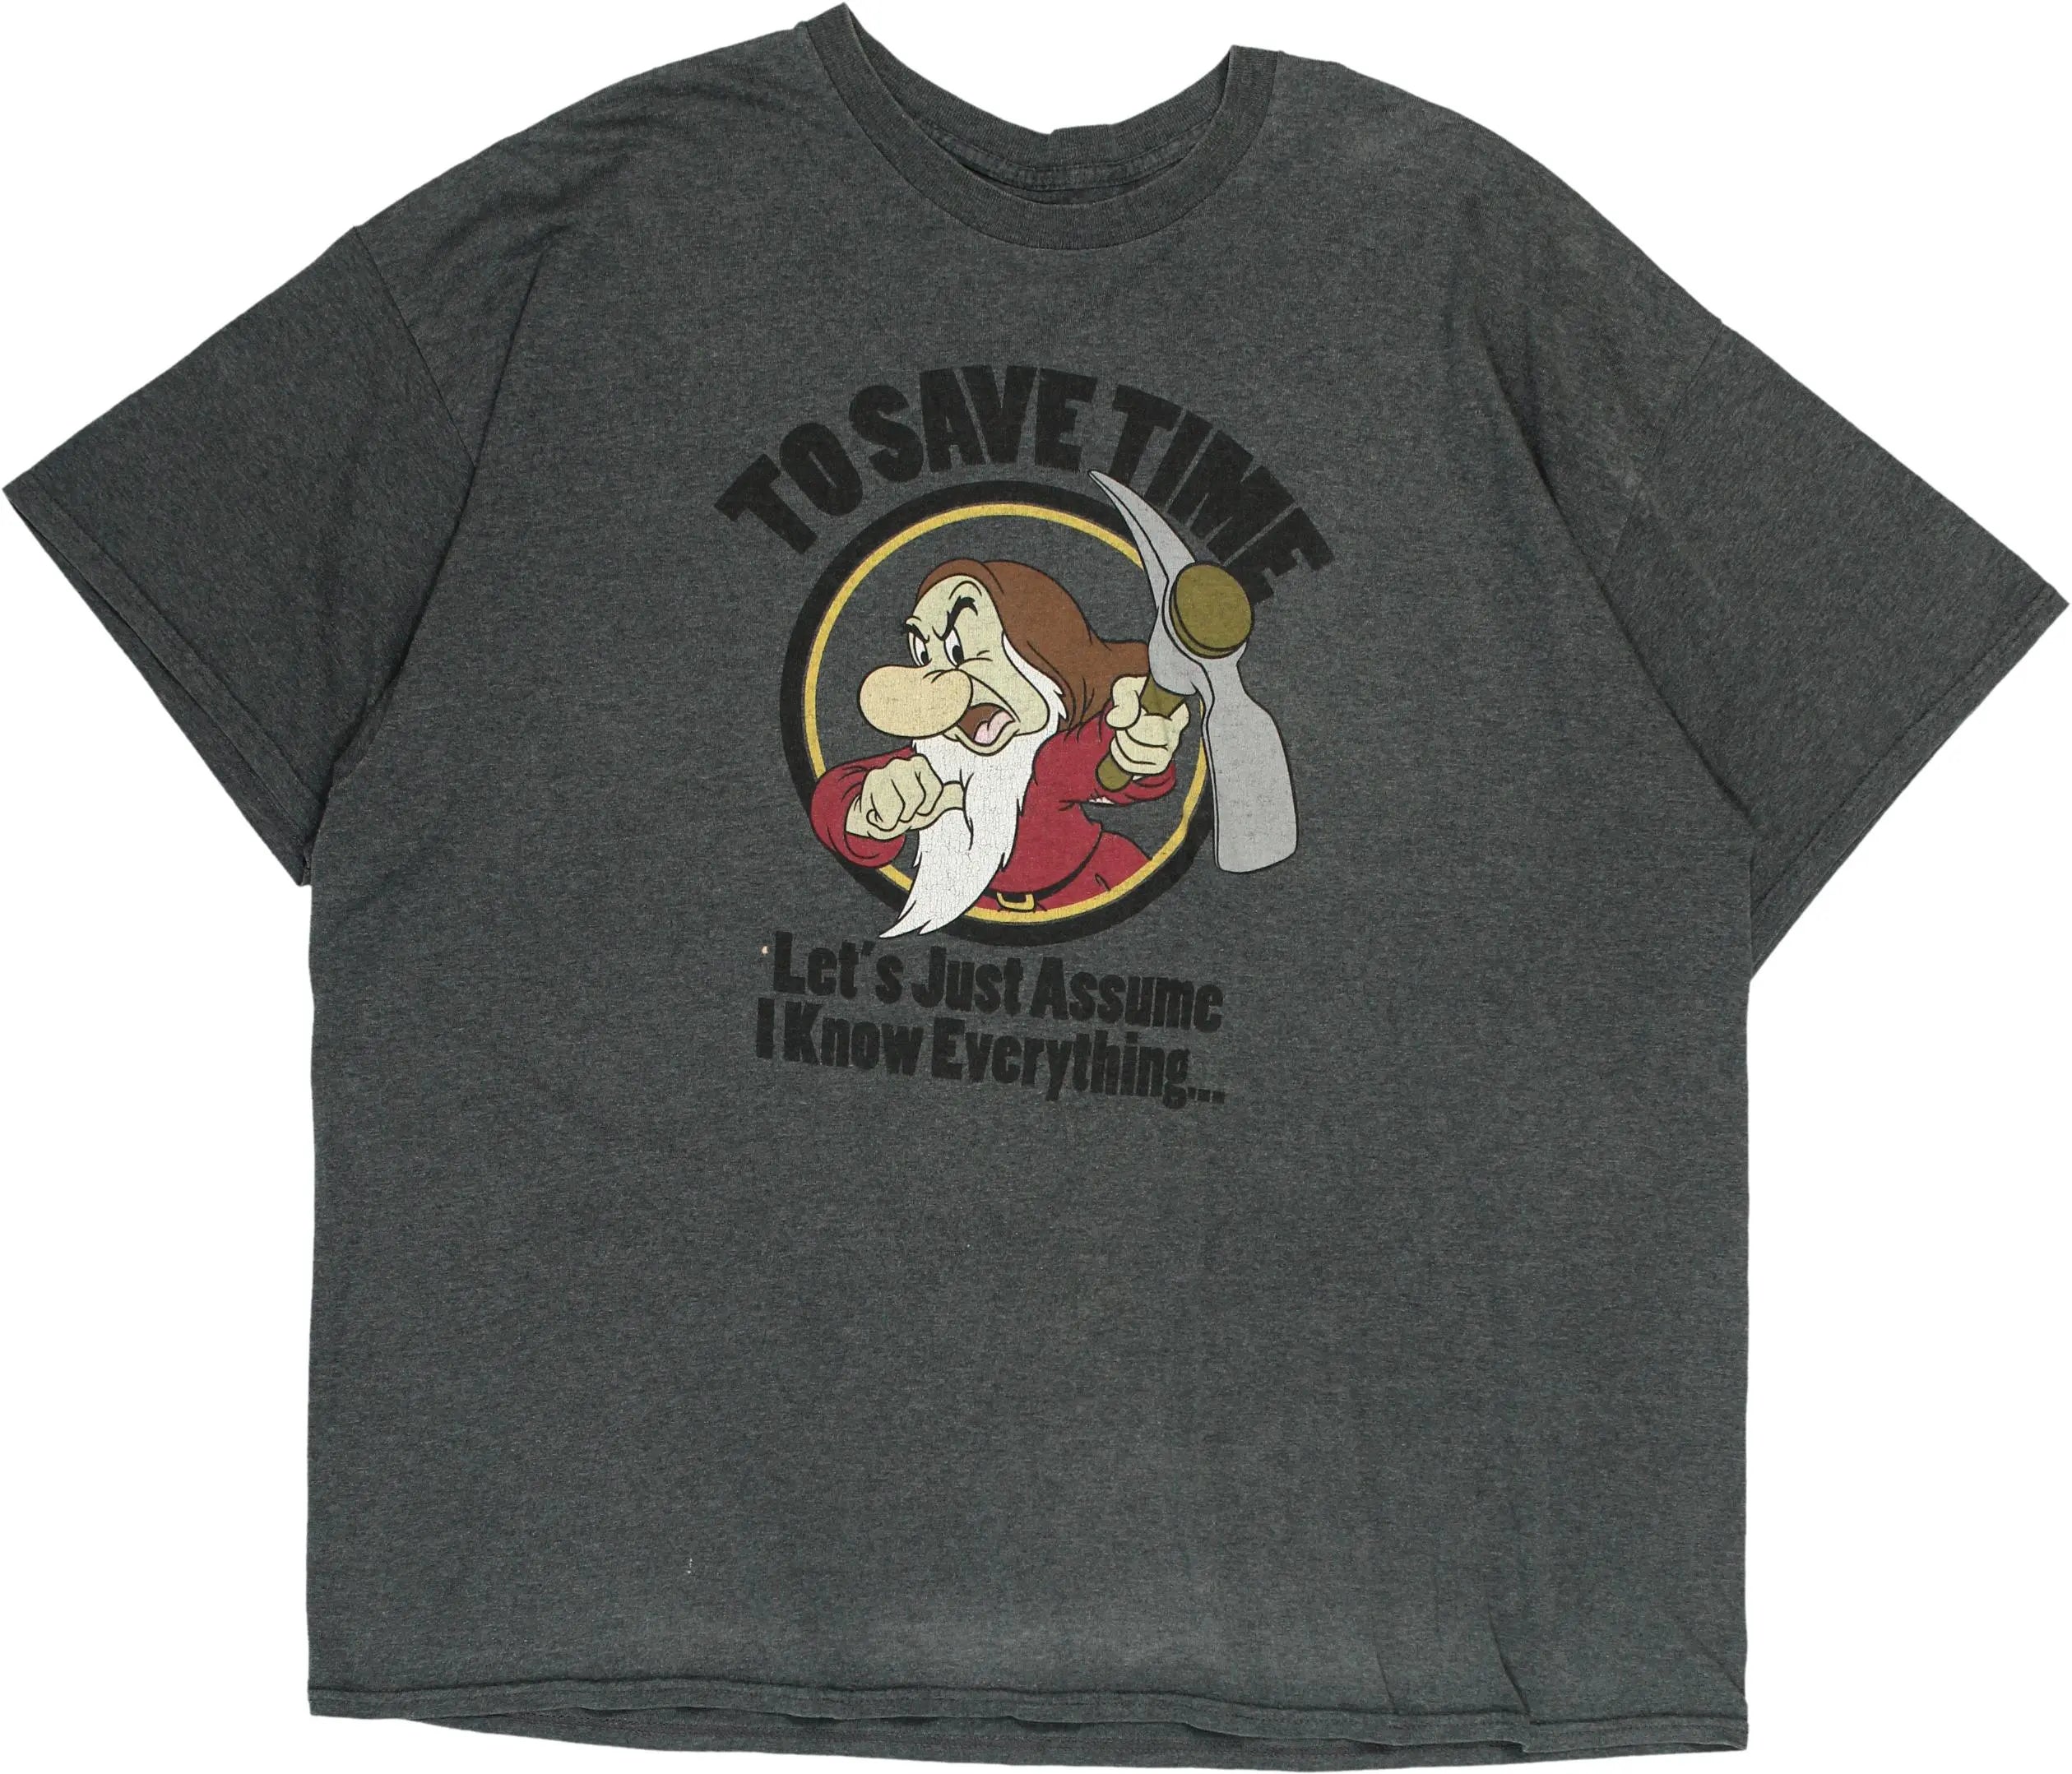 Disney - T-shirt- ThriftTale.com - Vintage and second handclothing